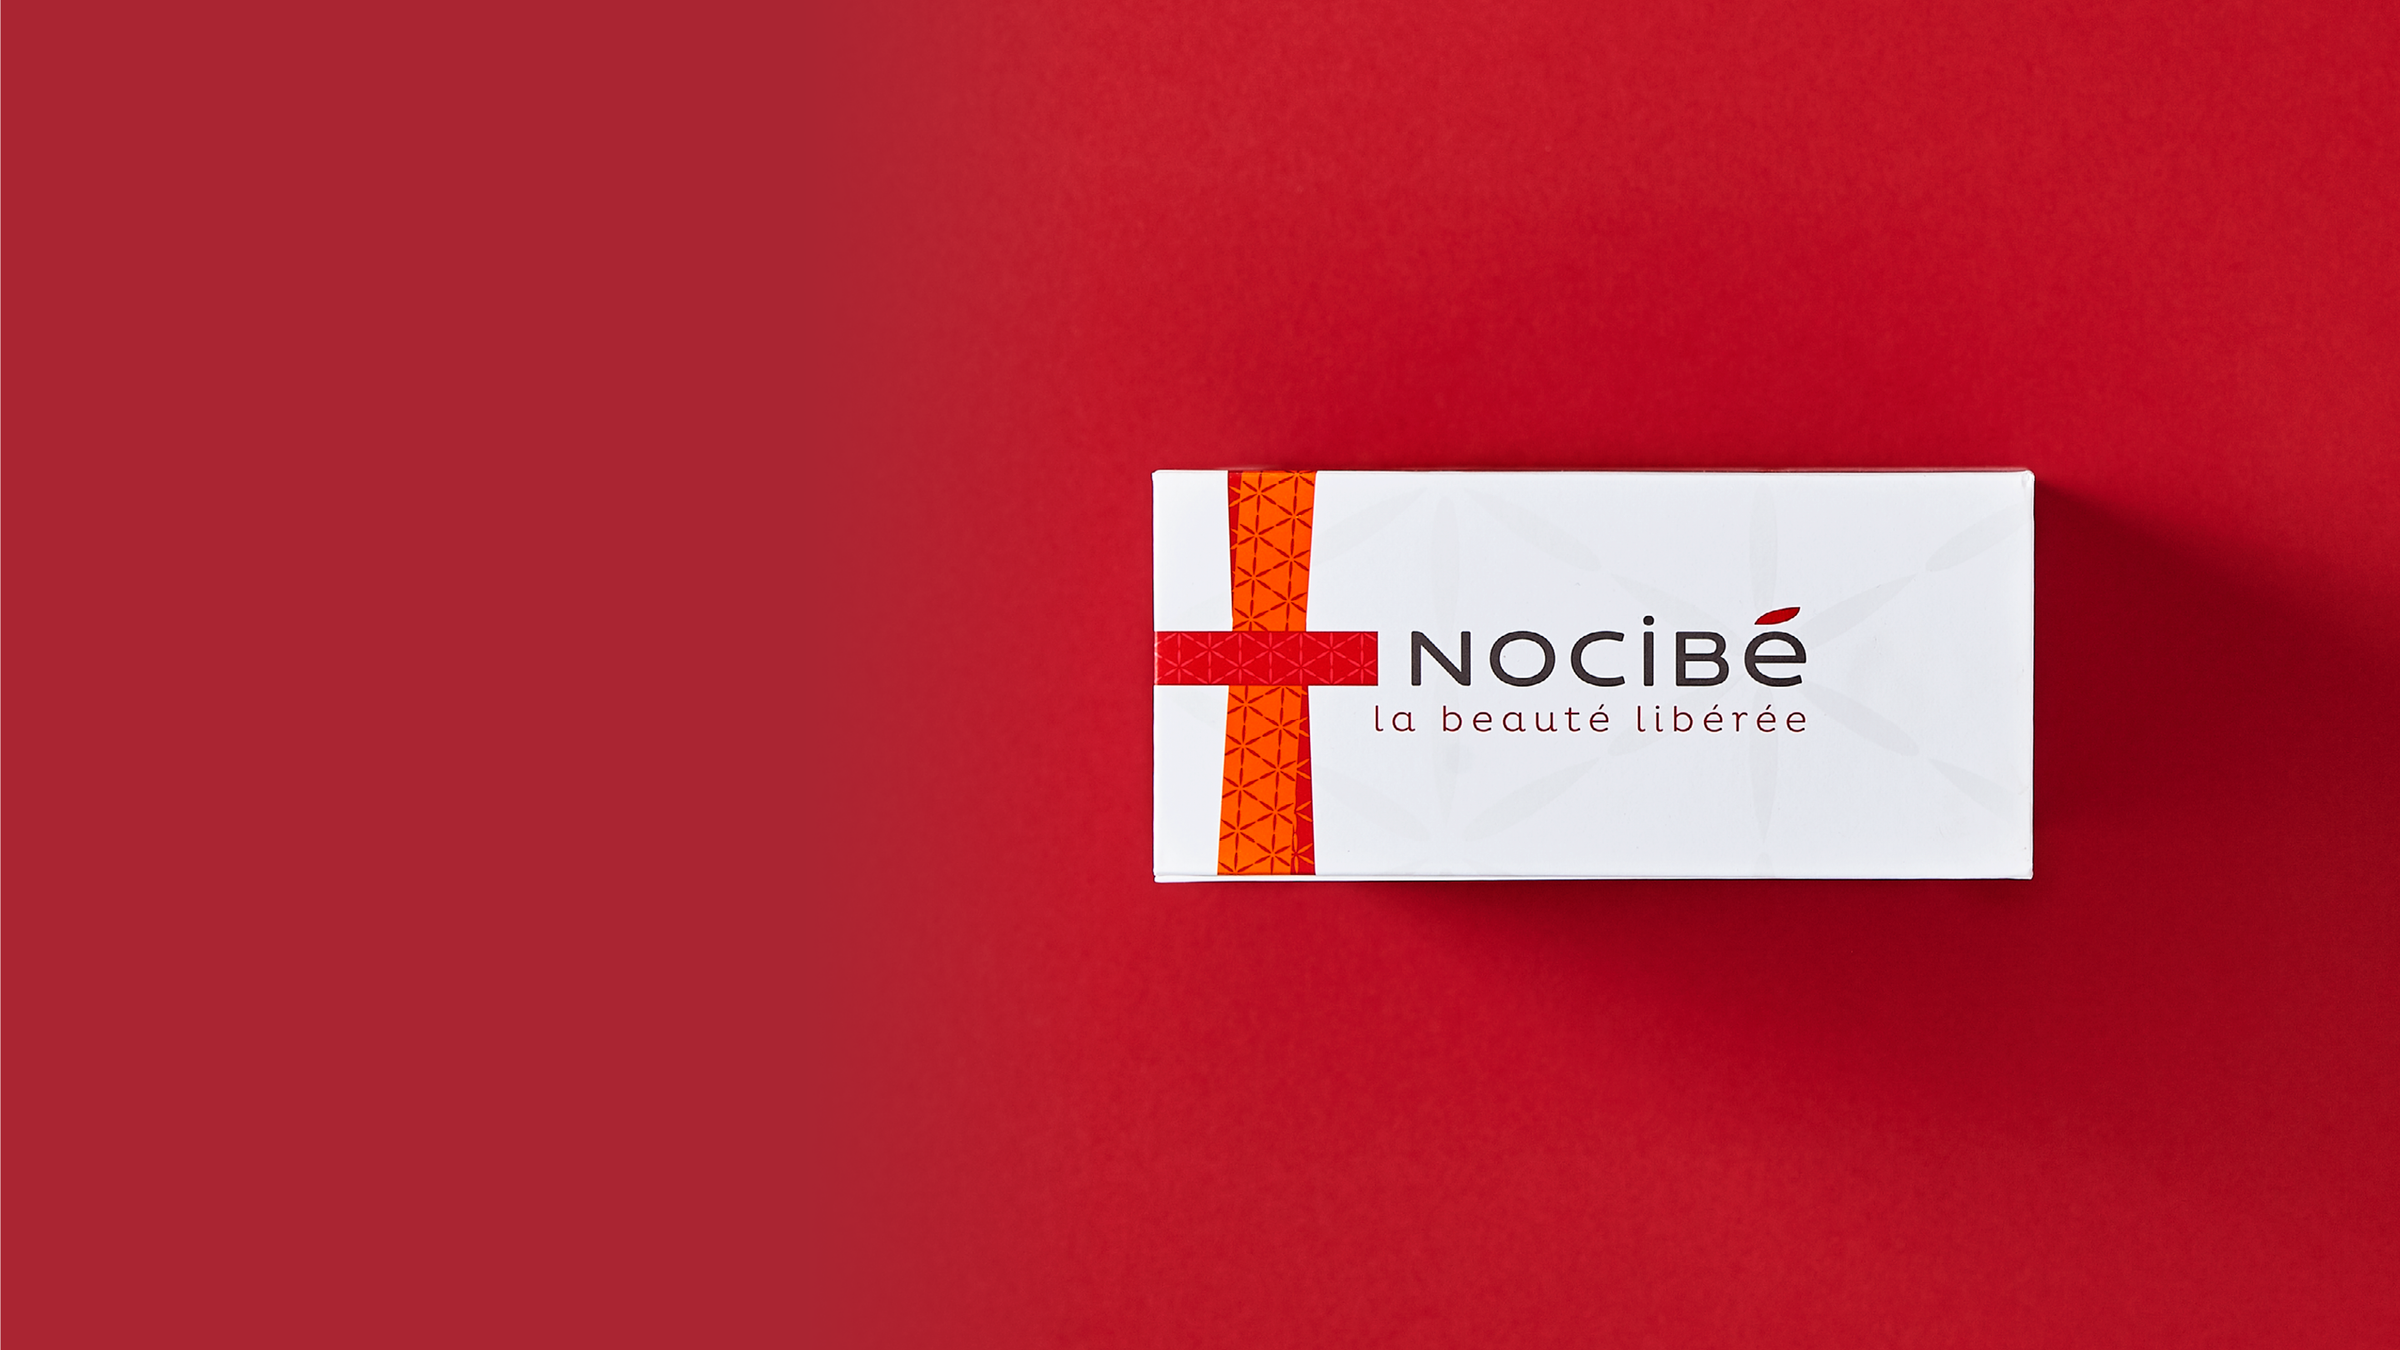 A white cardboard box with magnetic closure for Nocibe against a red background